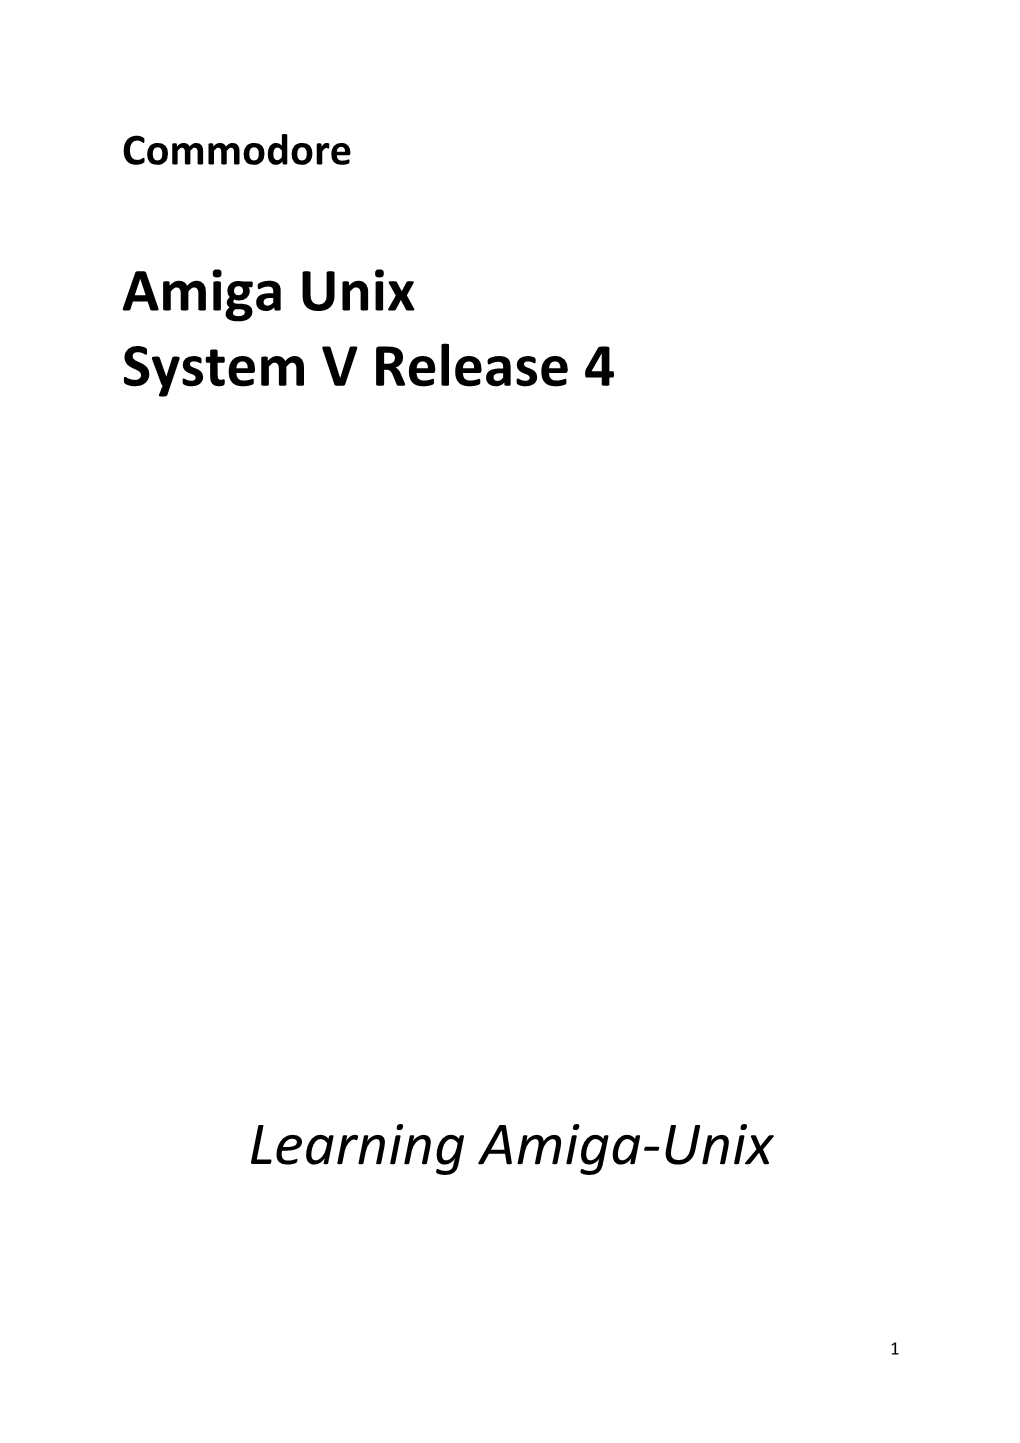 Learning Amiga UNIX Using Amiga UNIX Using Amiga UNIX Reference Pages Man Pages AT&T Manuals 6